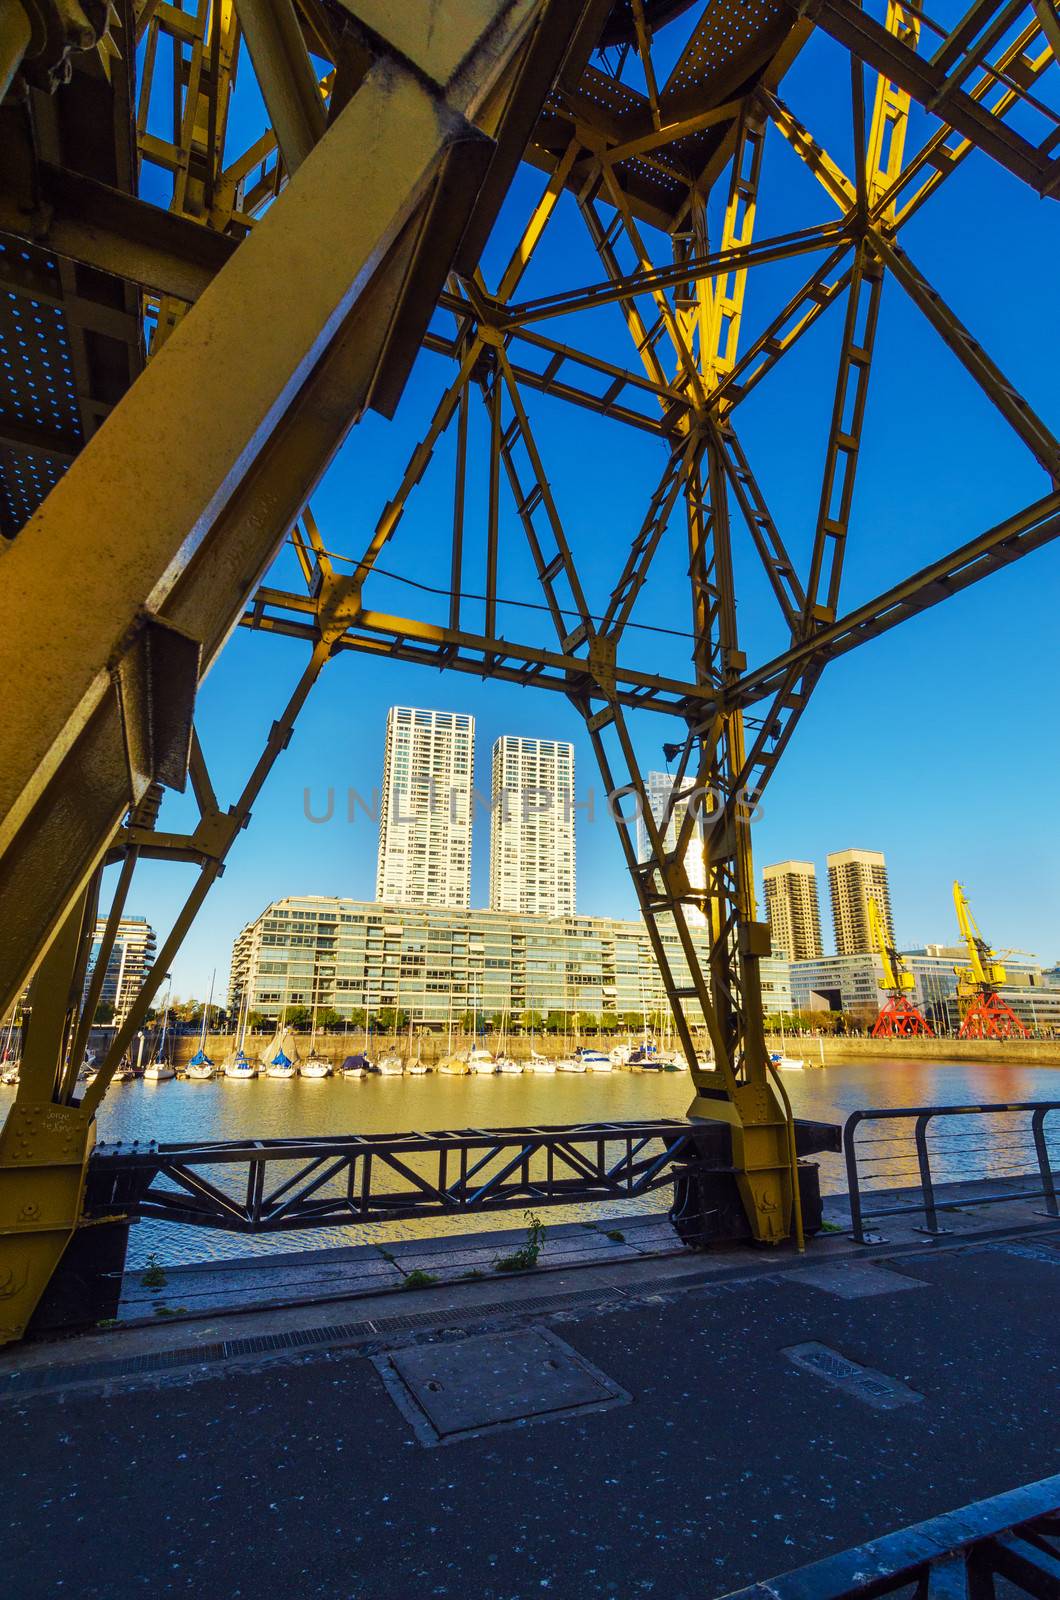 View of Puerto Madero skyscrapers as seen from under a crane in Buenos Aires